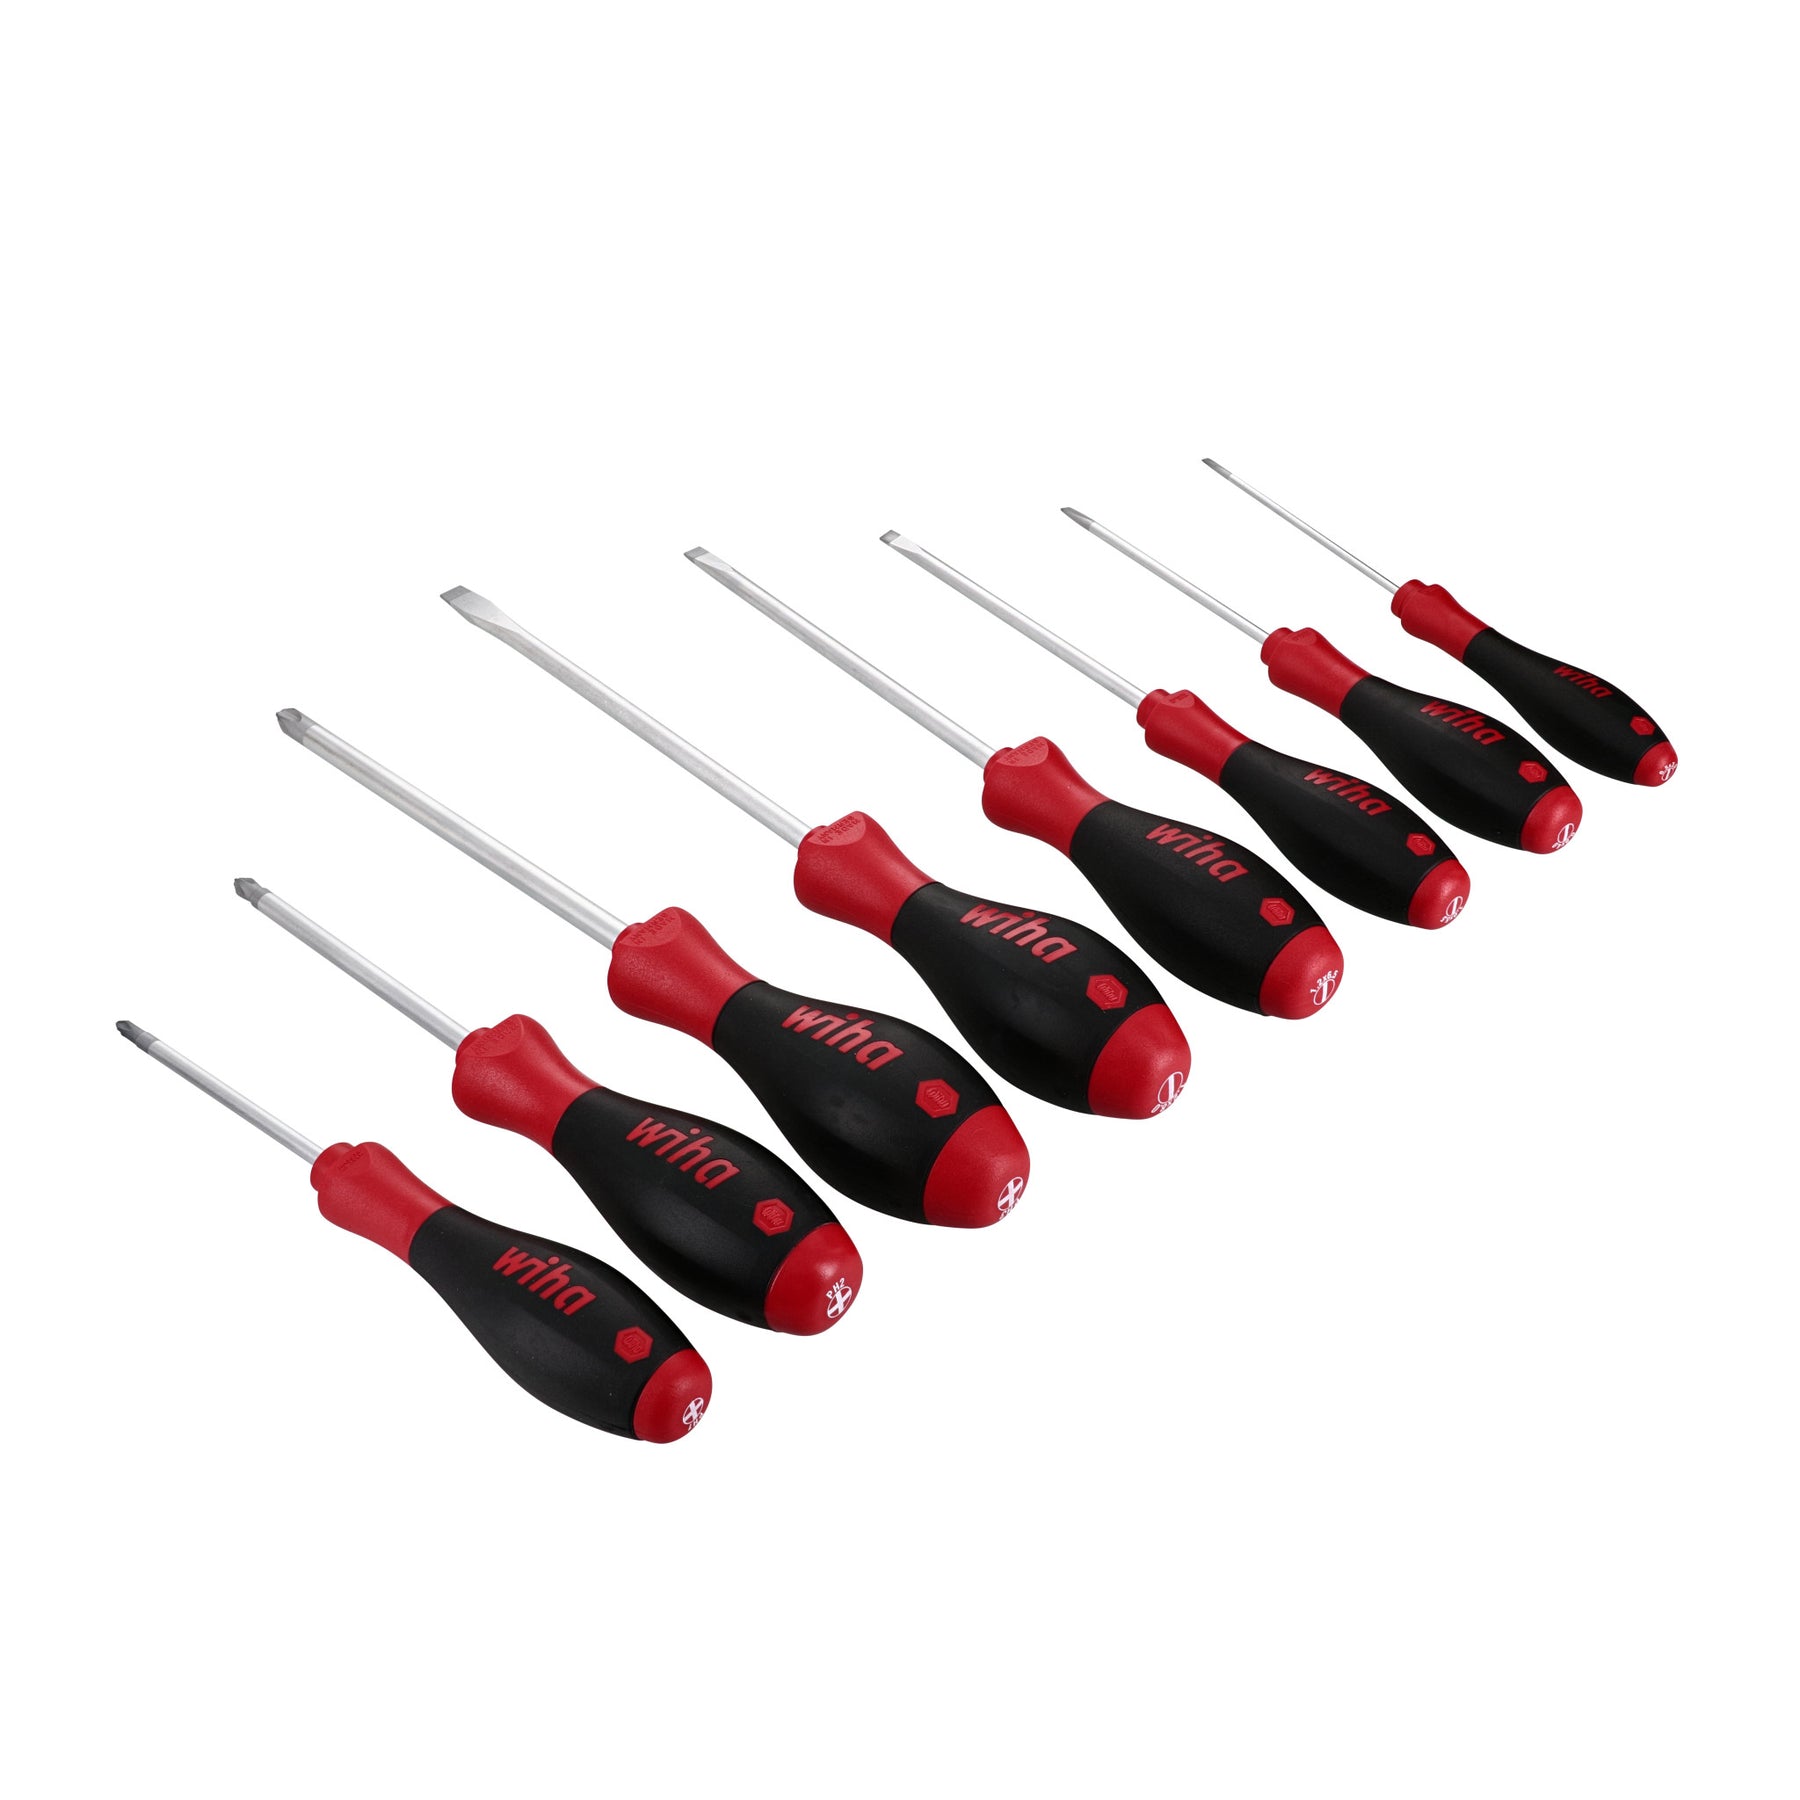 8 Piece SoftFinish Slotted and Phillips Screwdriver Set